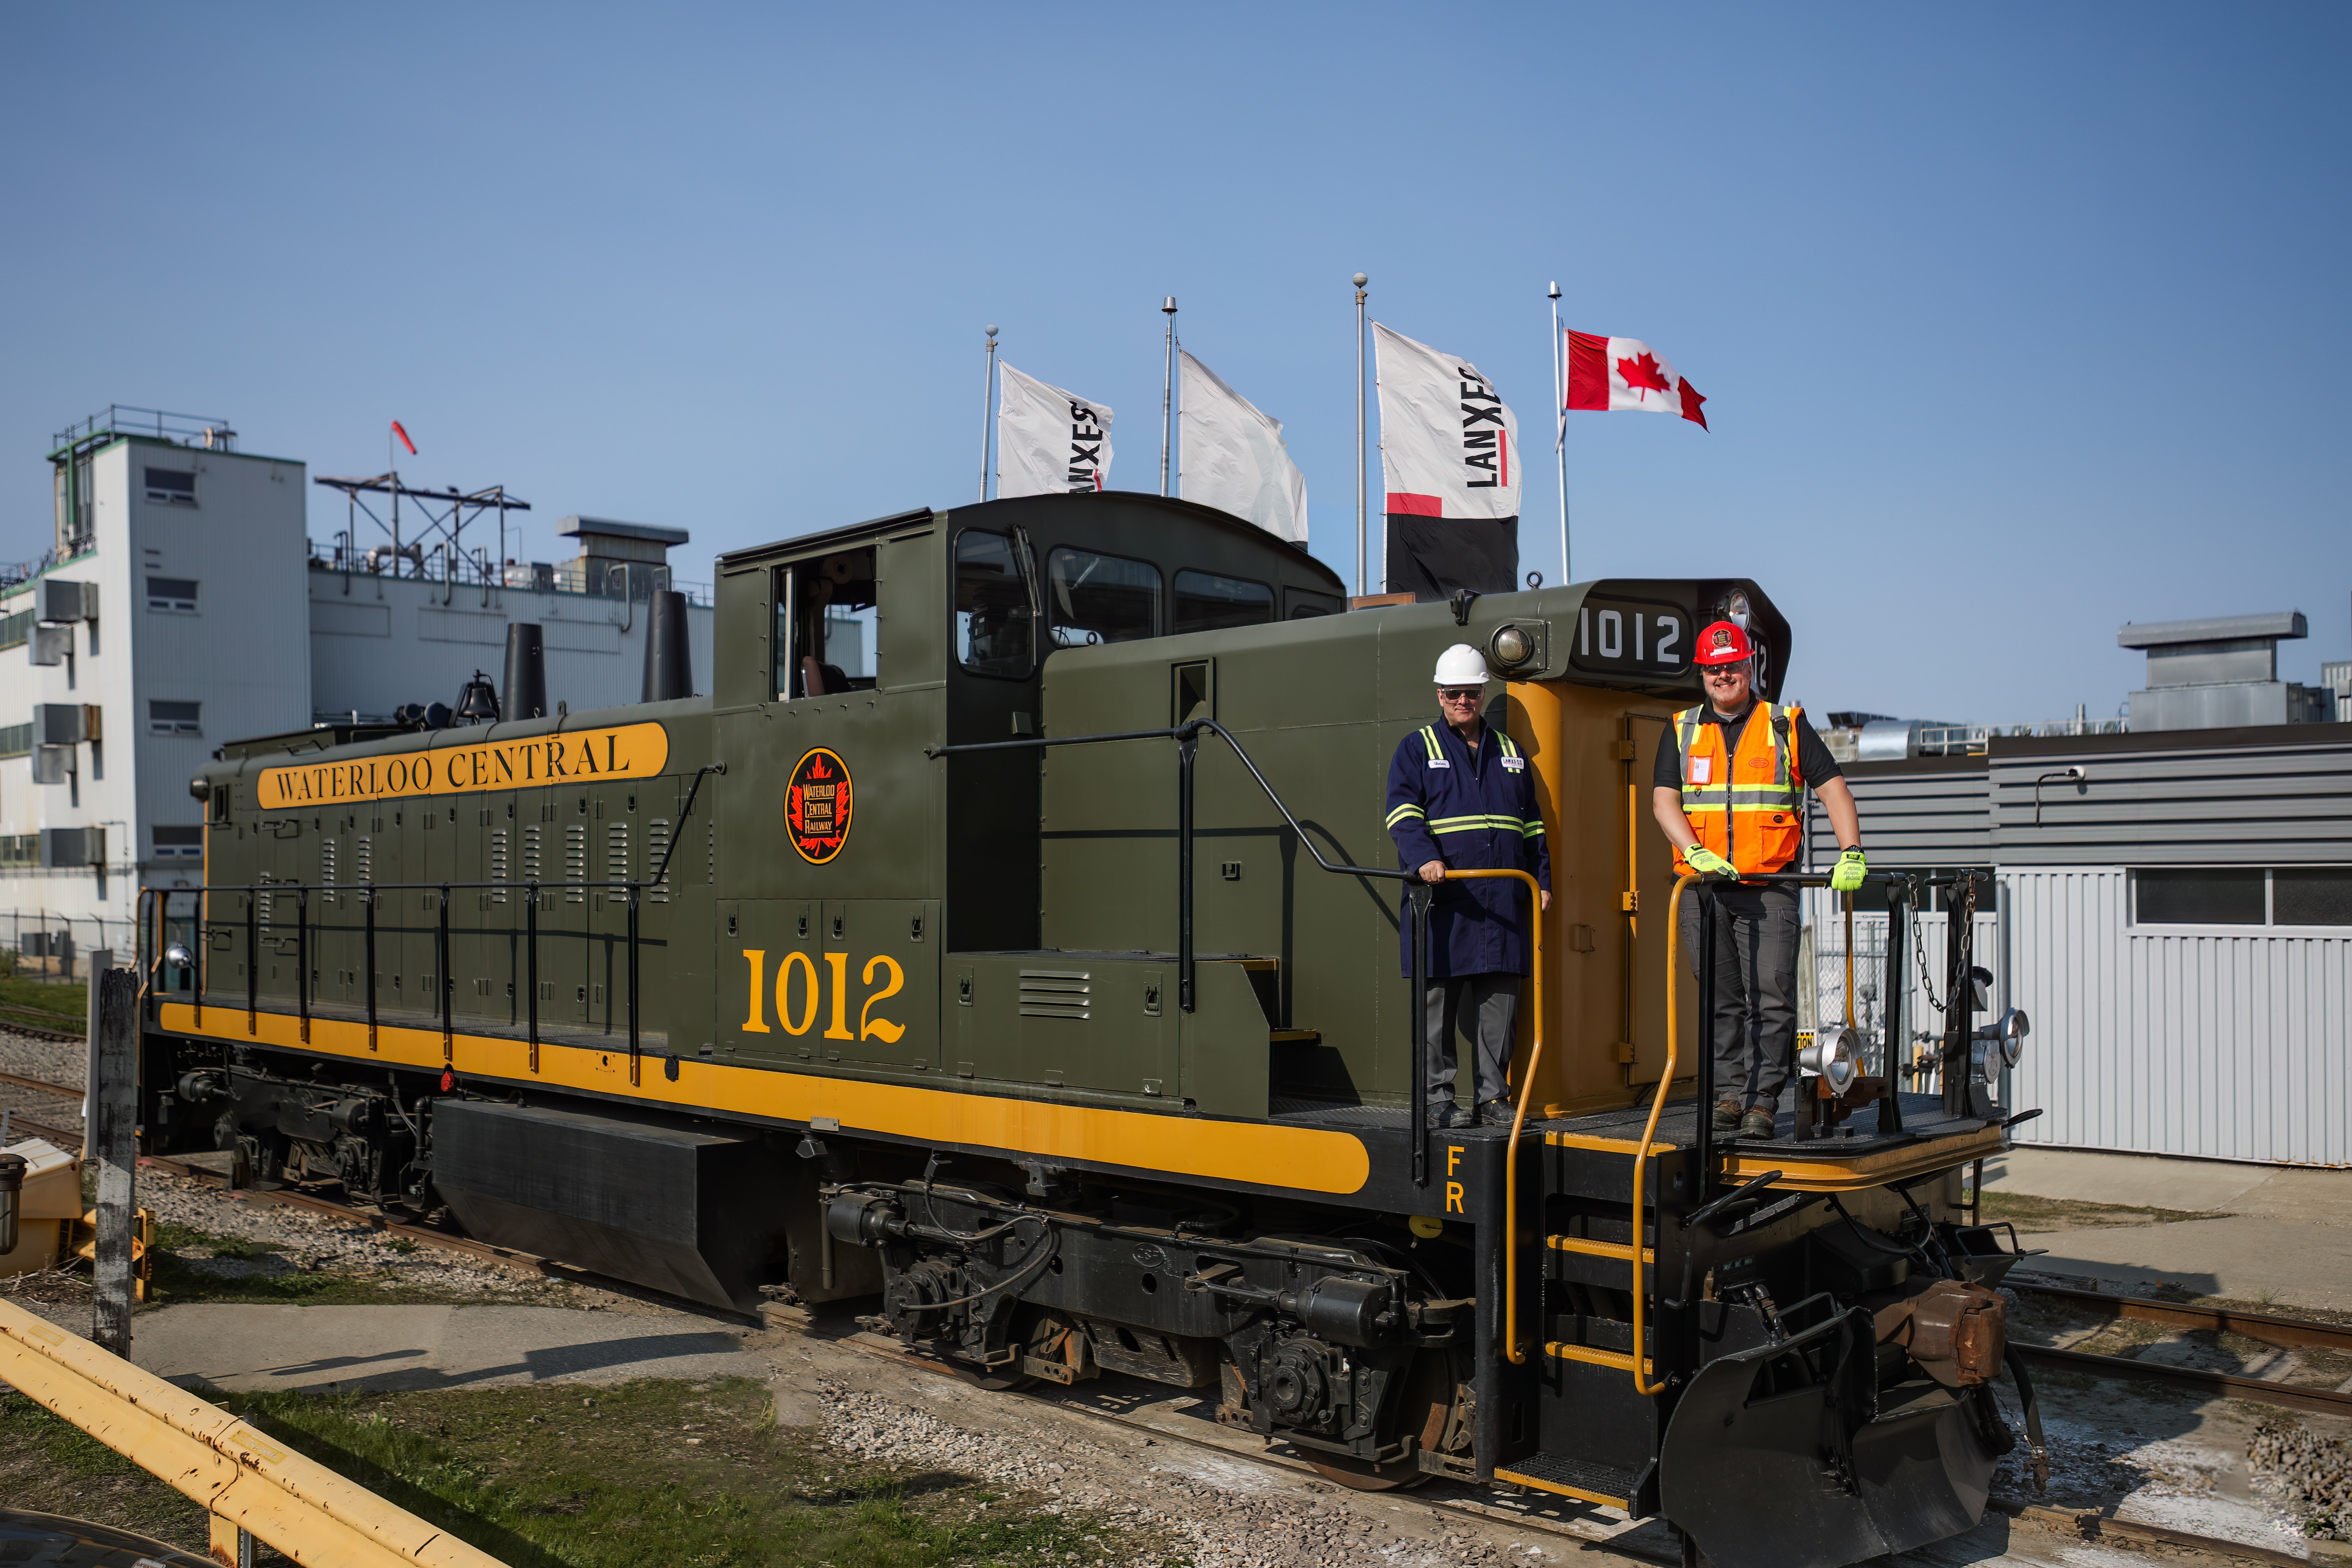 LANXESS Elmira and the Waterloo Central Railway are celebrating one-year of a unique agreement that benefits both organizations, as well as residents in the nearby community.